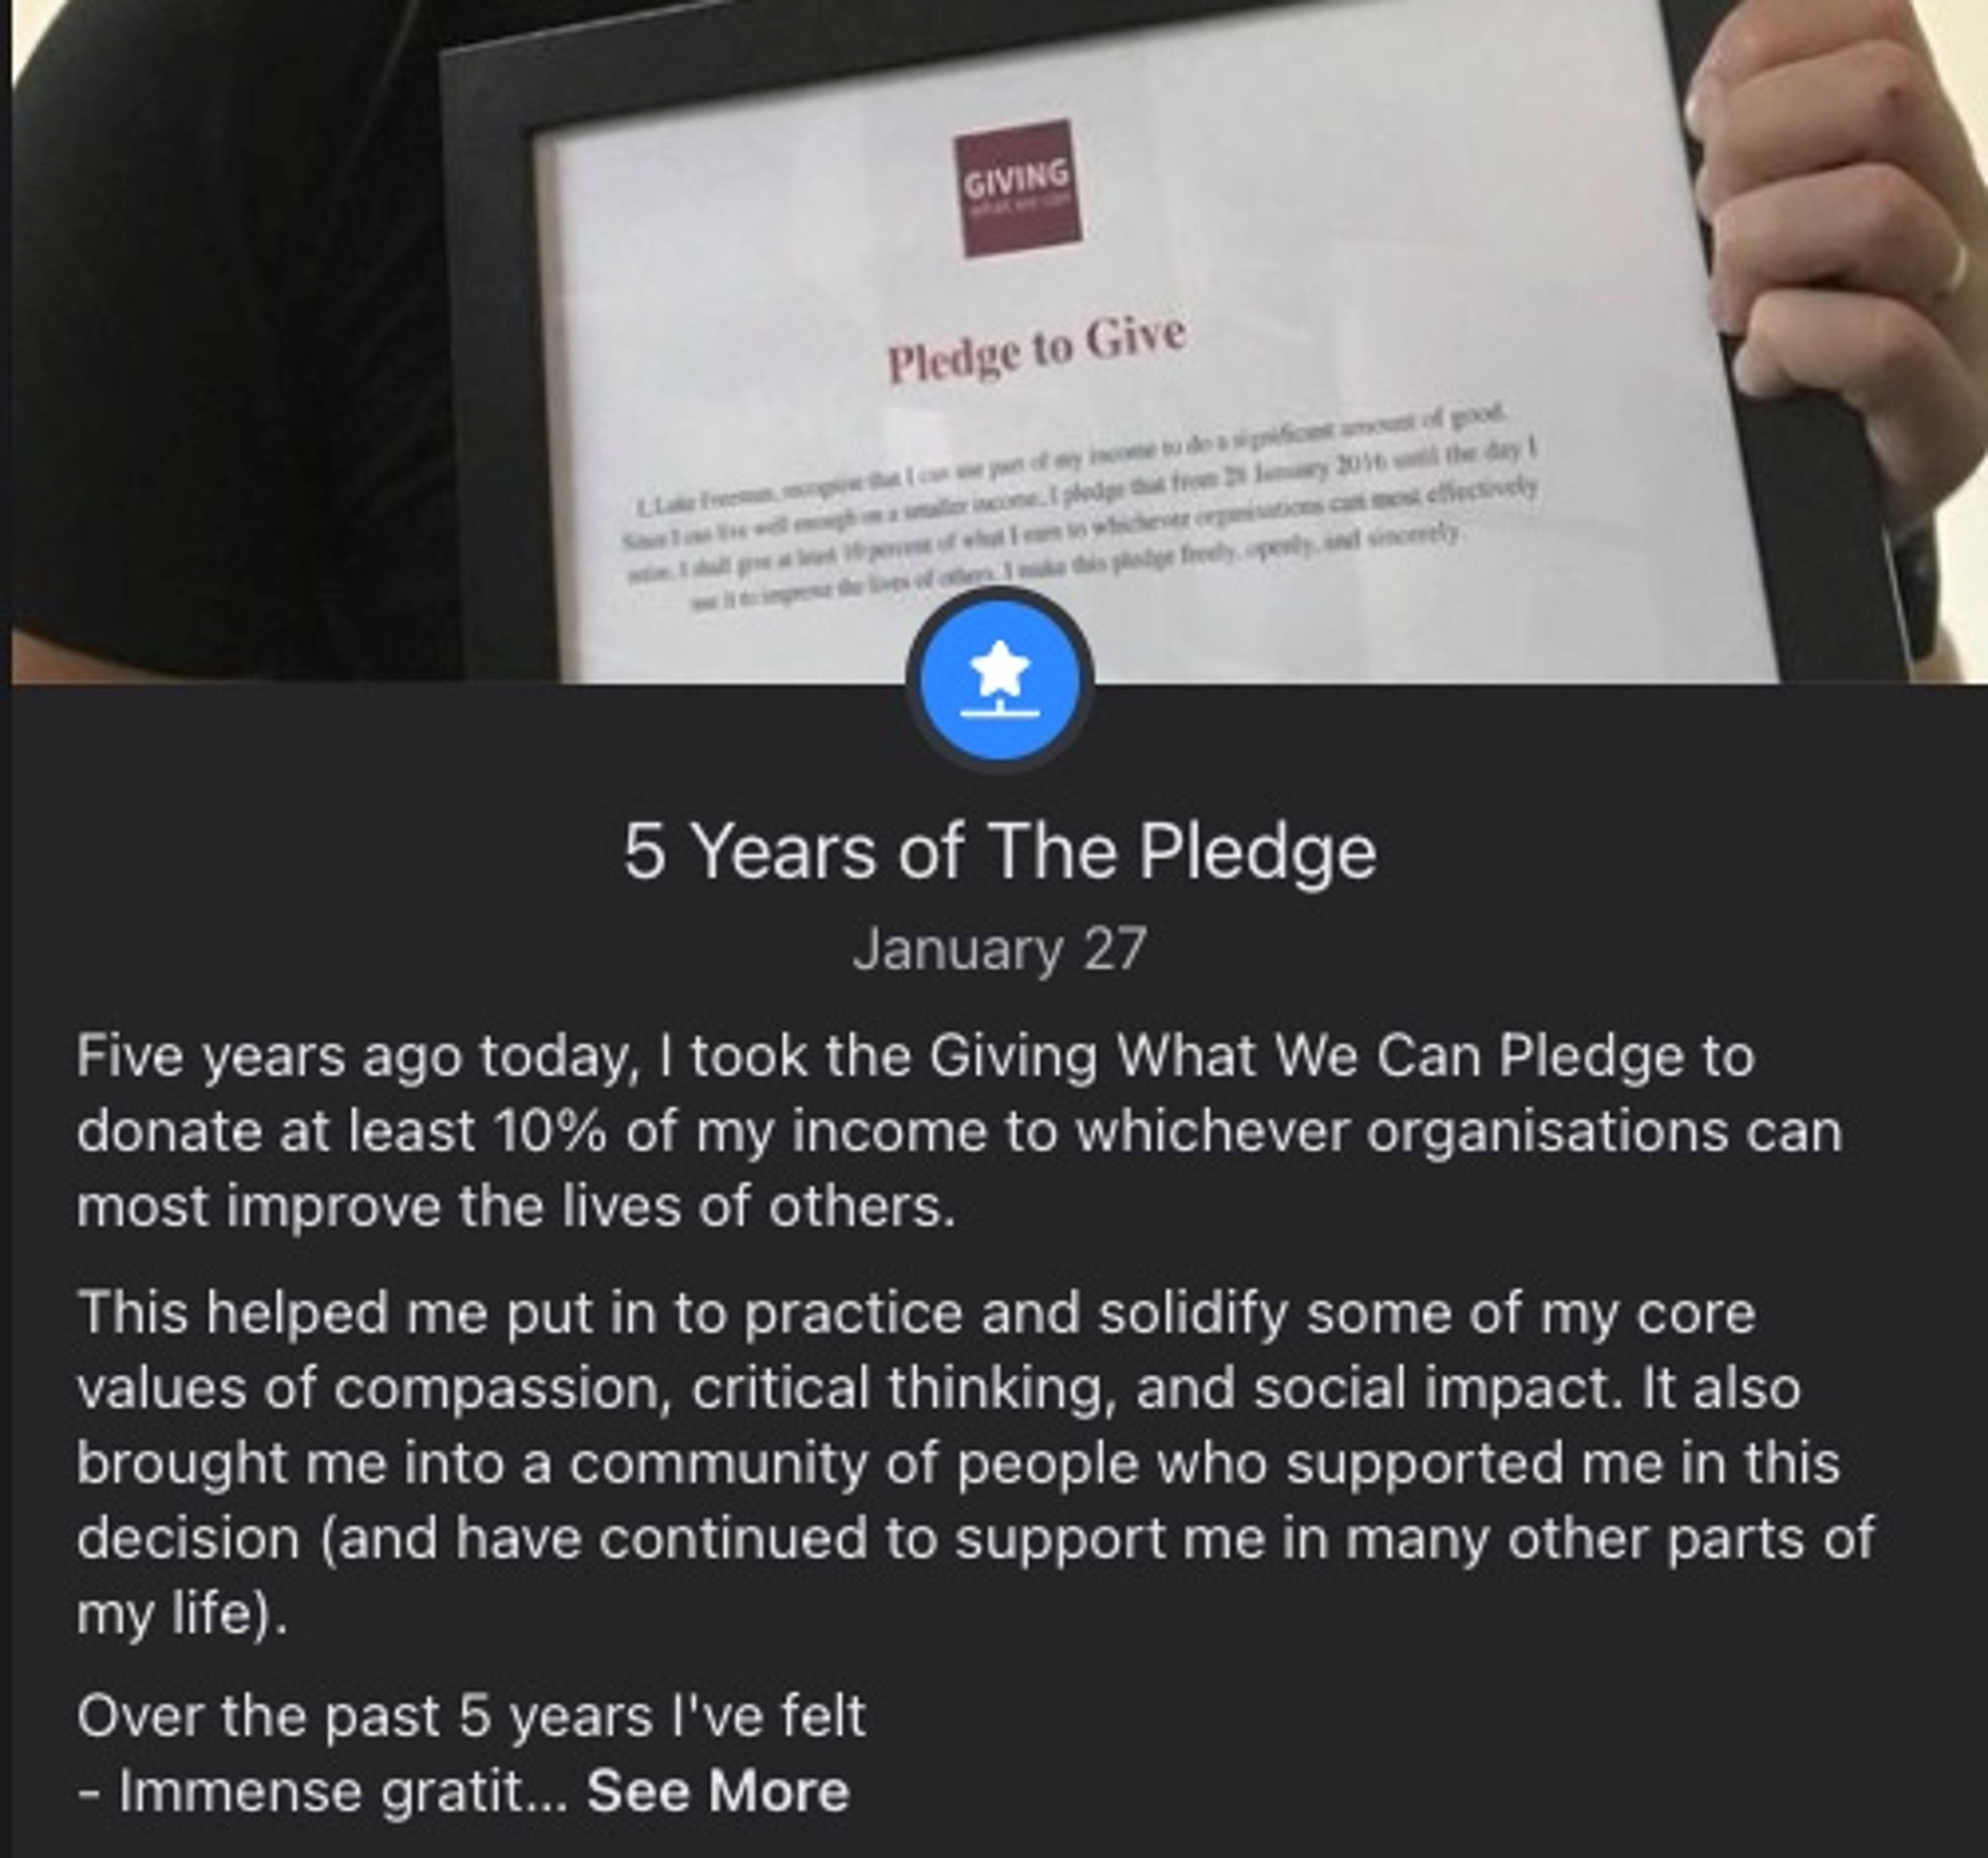 5 Years of the Pledge